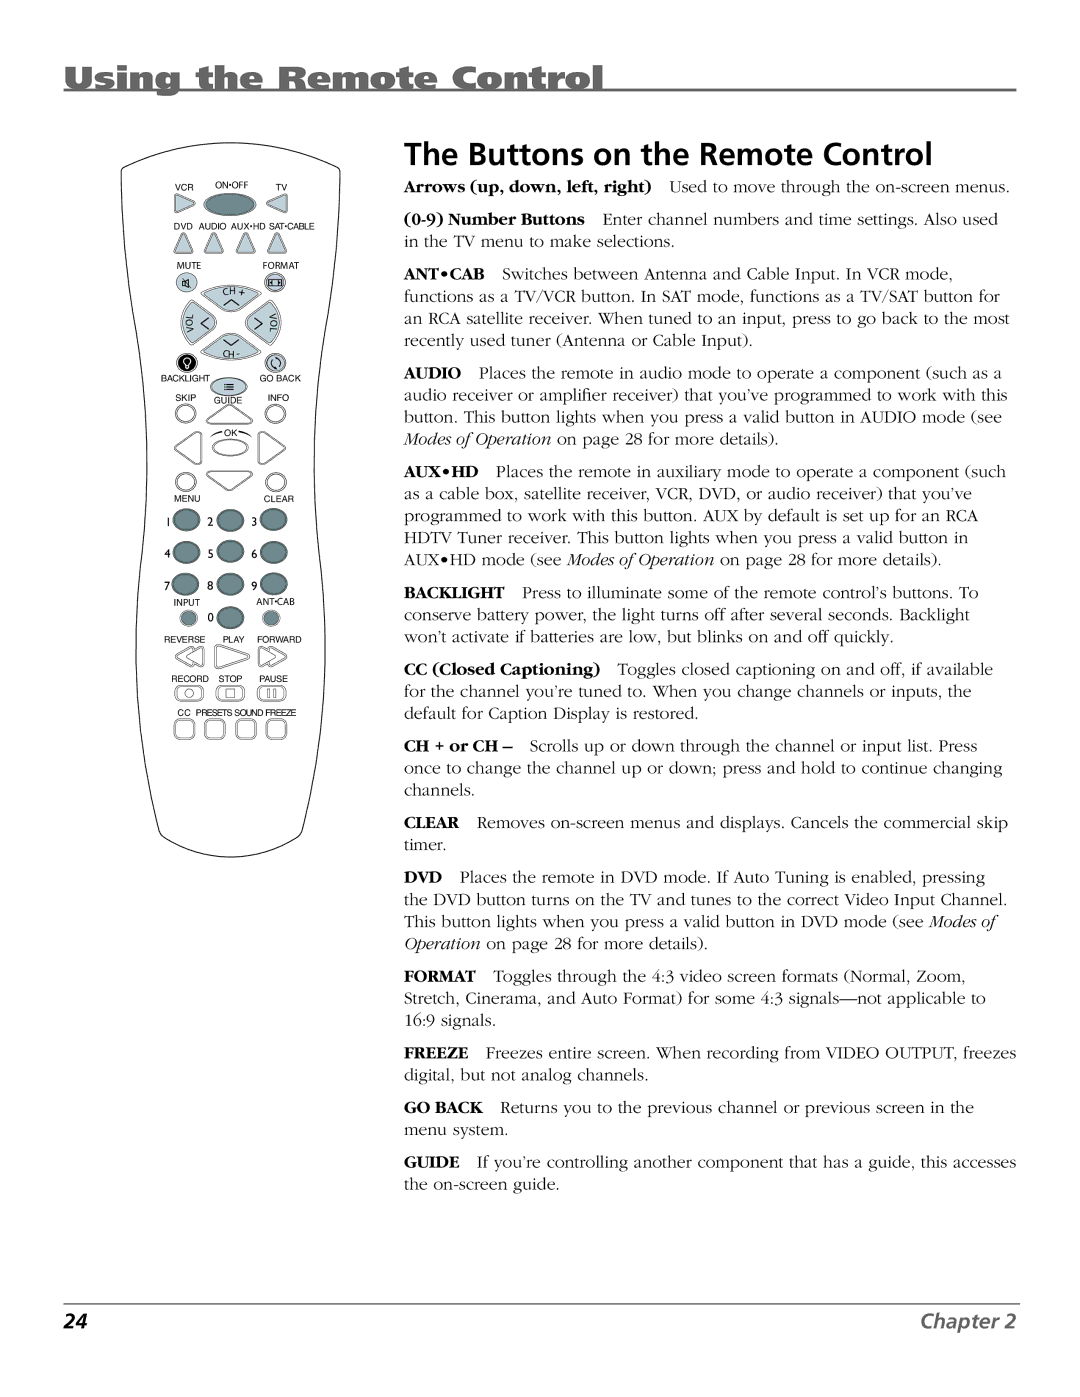 RCA HDTV manual Using the Remote Control, Buttons on the Remote Control 